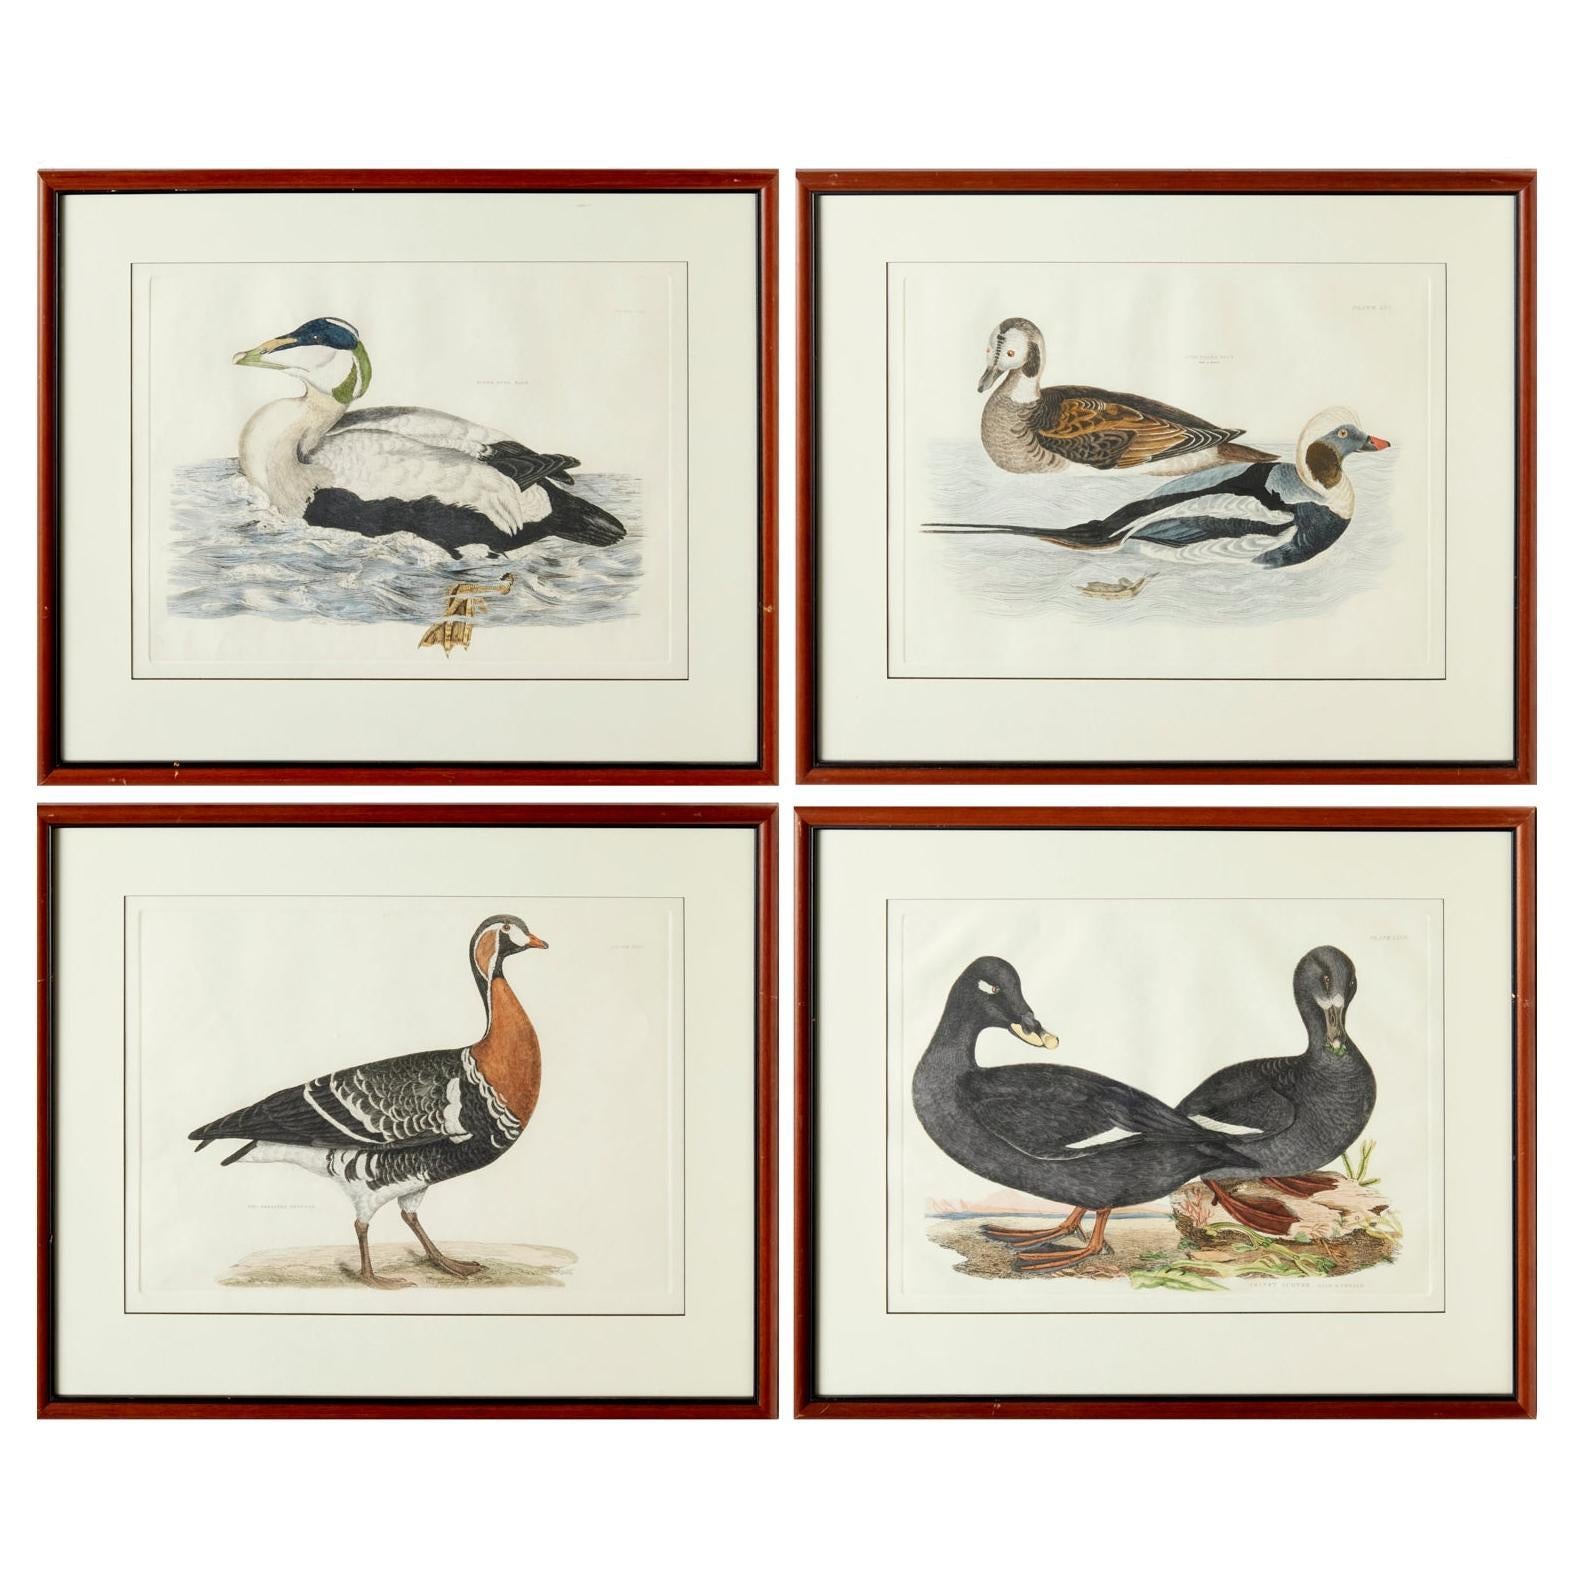 Prideaux John Selby, England, Set of 4 Hand Colored Restrike Prints of Waterfowl